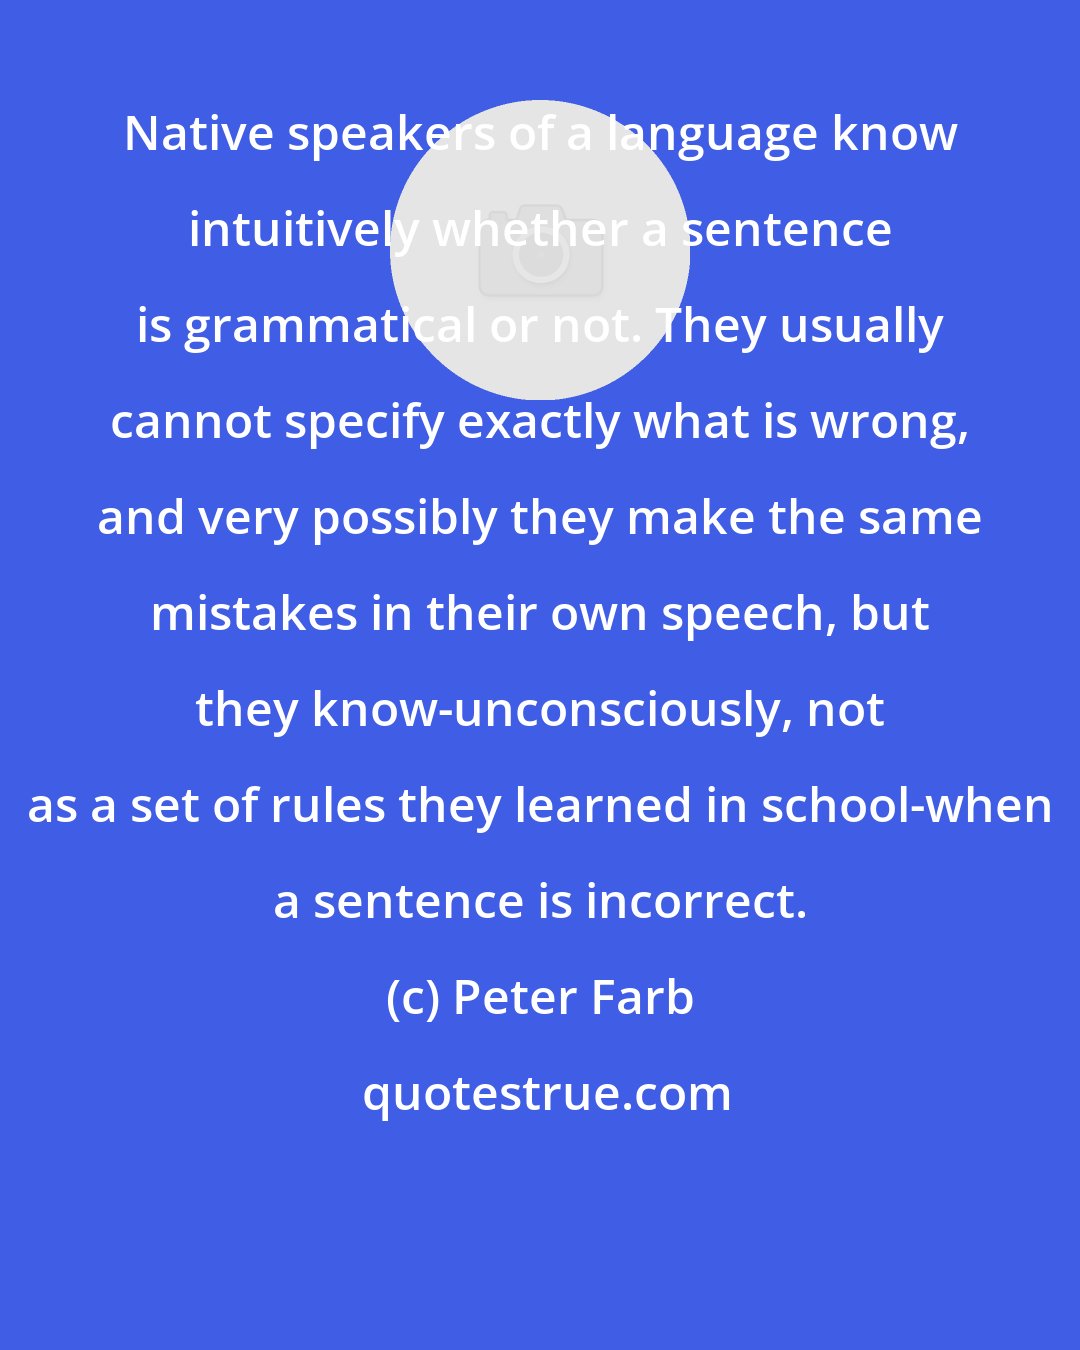 Peter Farb: Native speakers of a language know intuitively whether a sentence is grammatical or not. They usually cannot specify exactly what is wrong, and very possibly they make the same mistakes in their own speech, but they know-unconsciously, not as a set of rules they learned in school-when a sentence is incorrect.